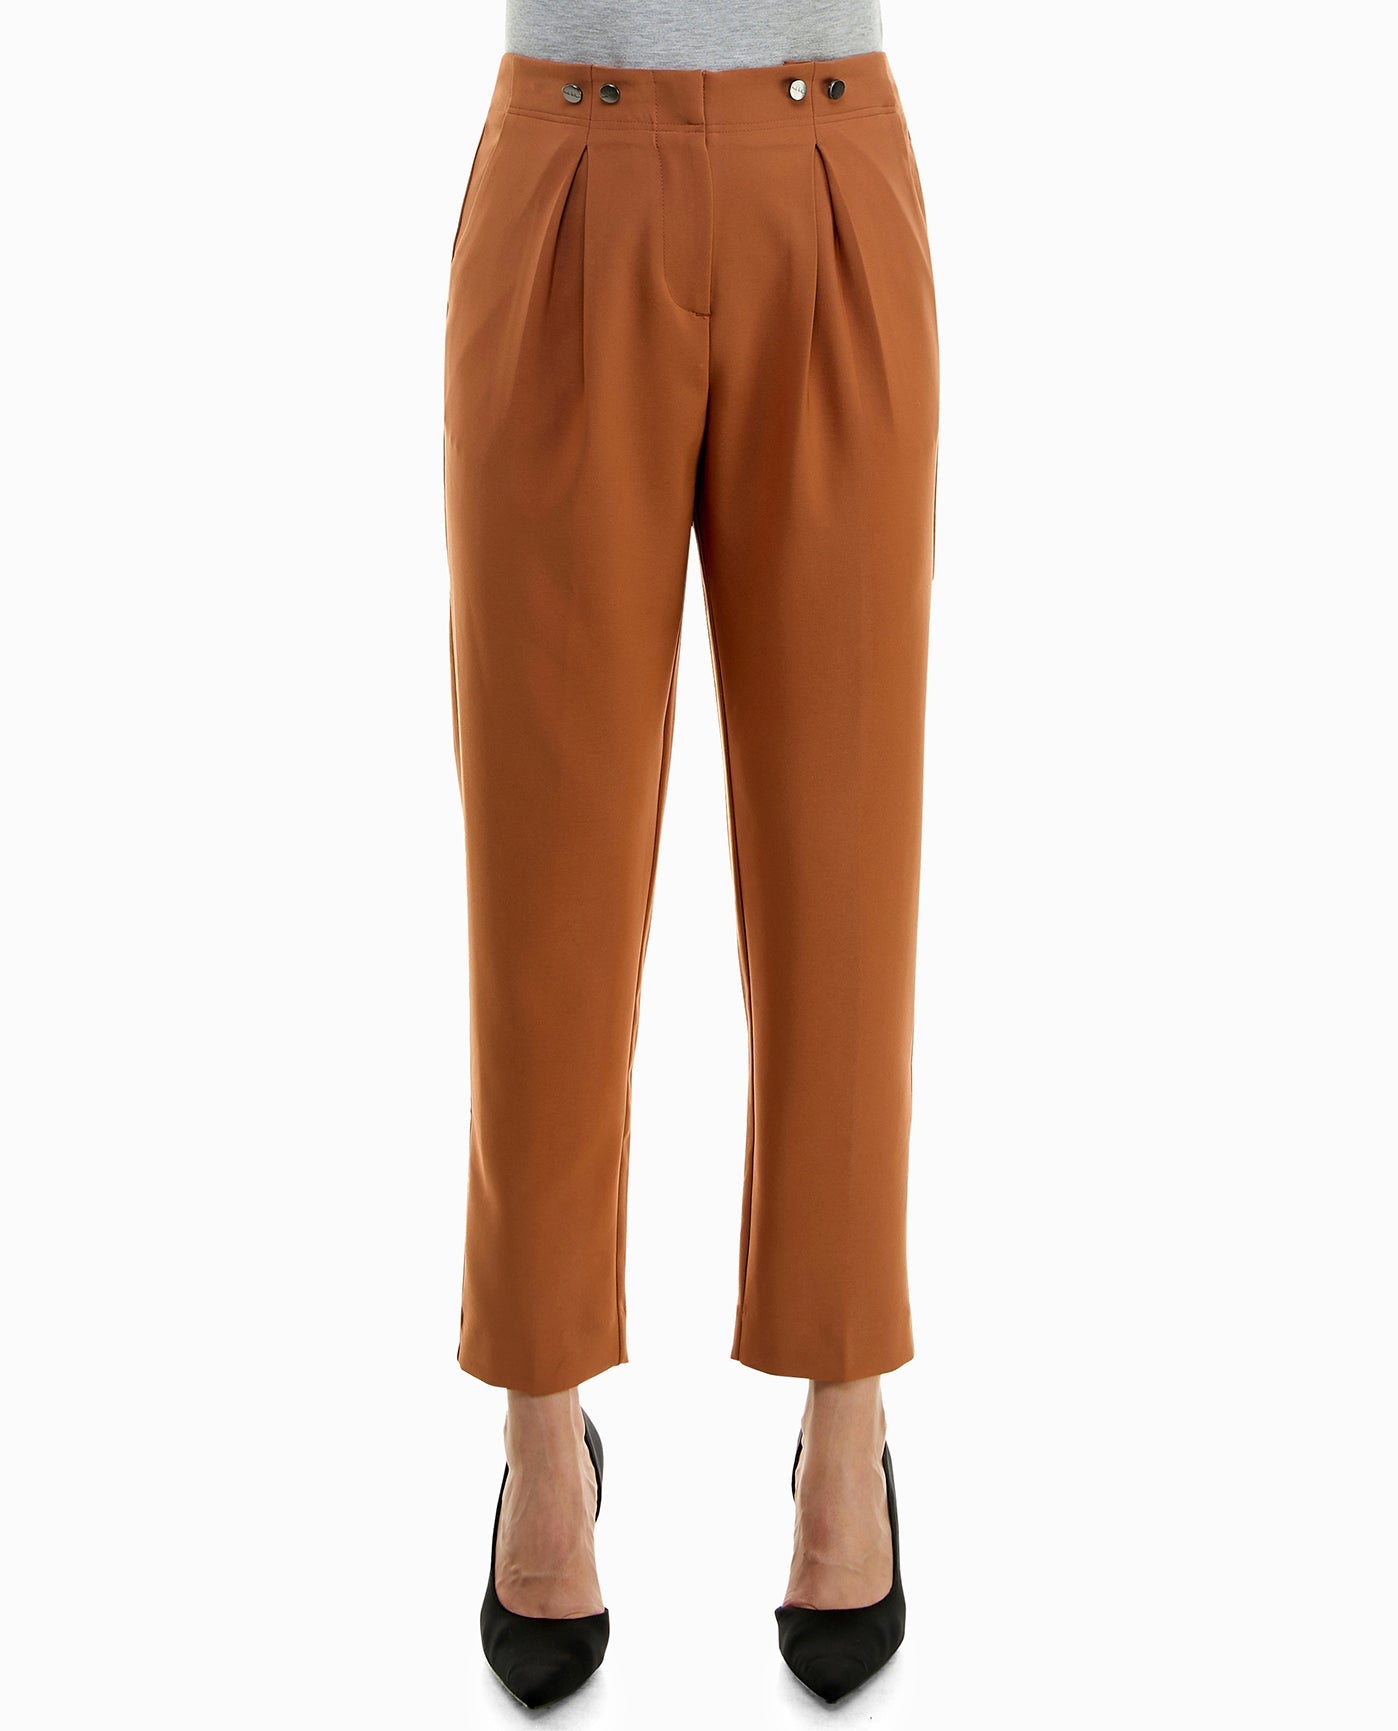 Women's High-rise Linen Pleat Front Straight Pants - A New Day™ Tan 18 :  Target